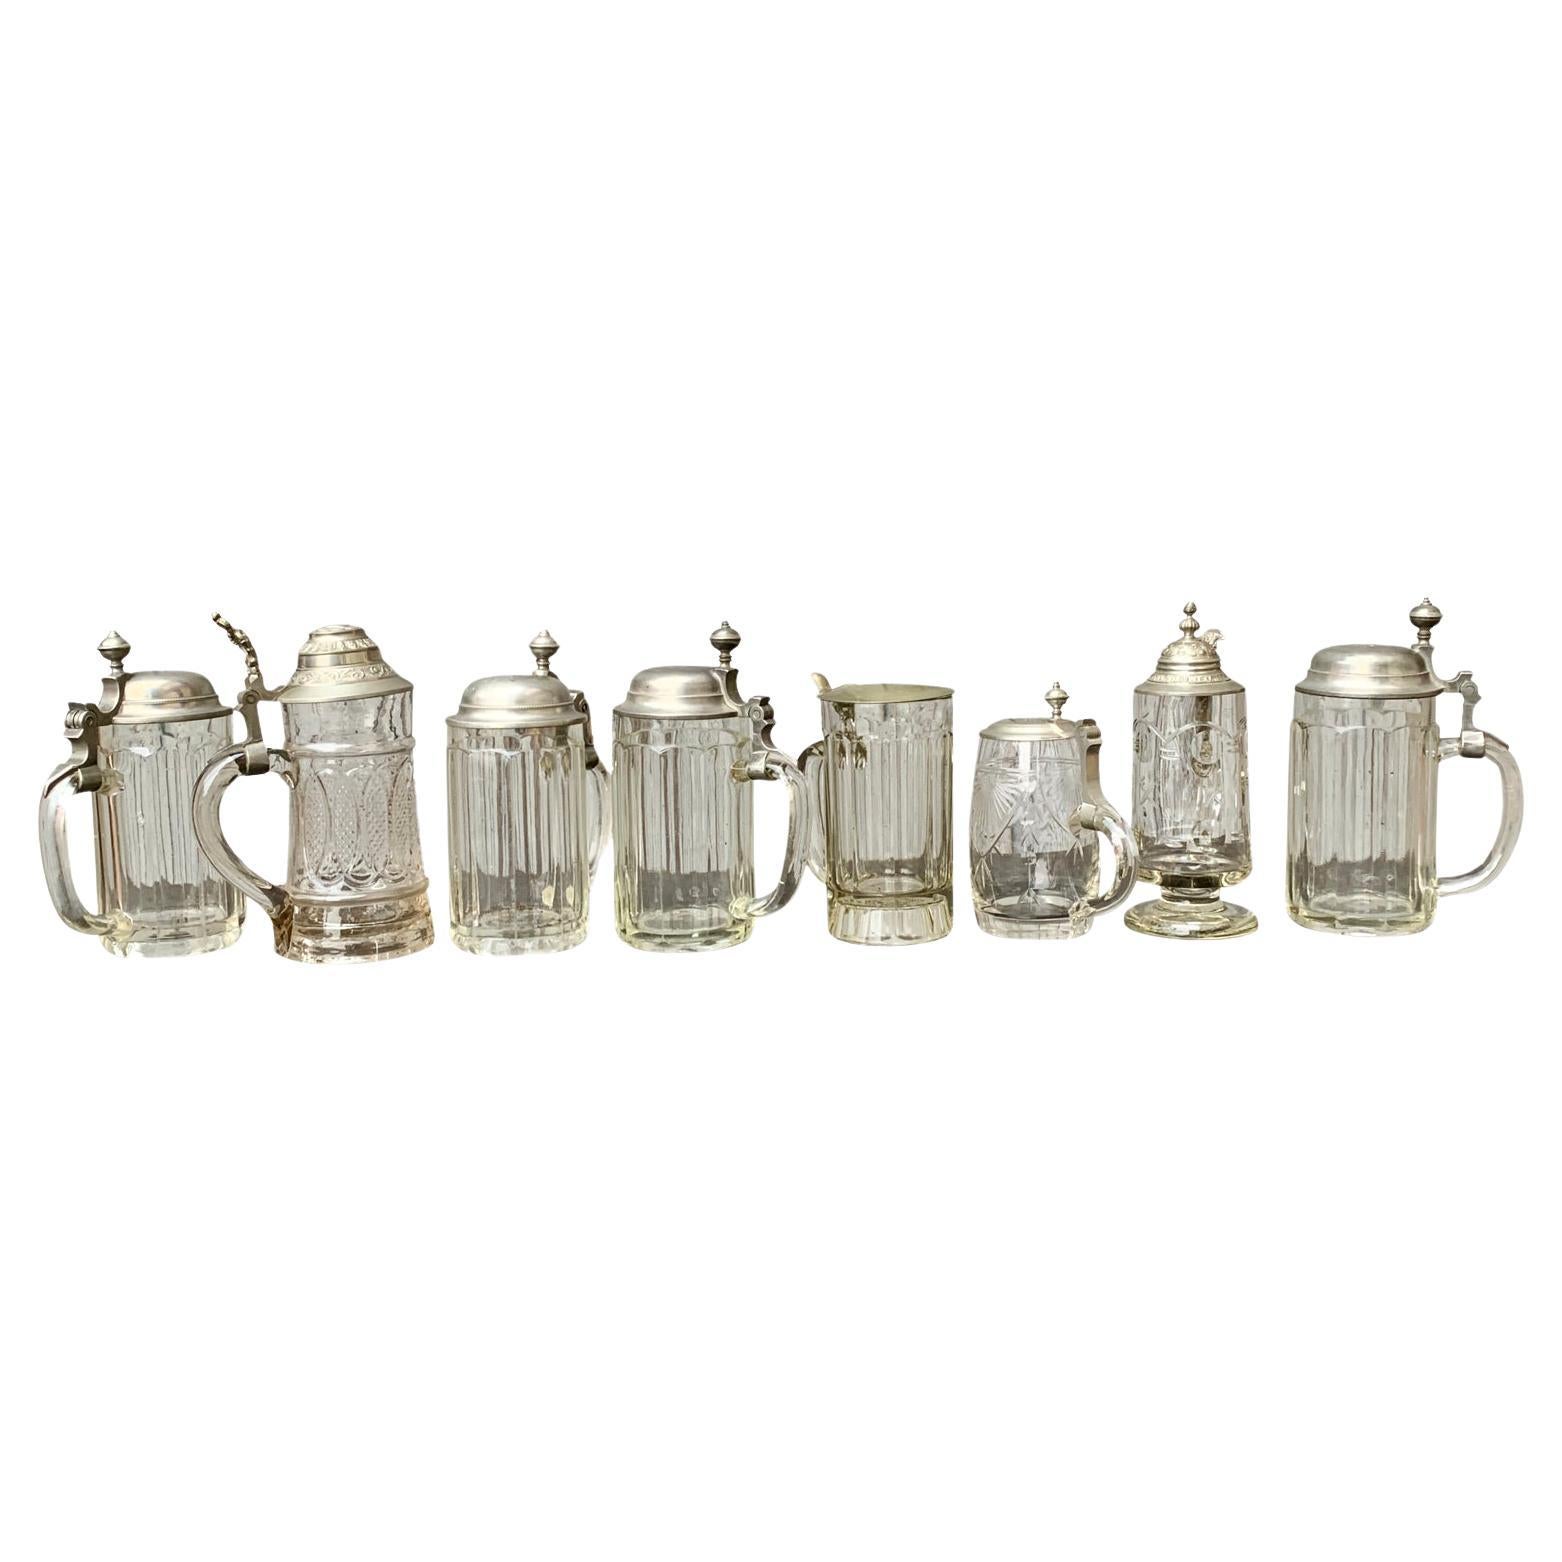 Collection of 8 Glass And Metal German Tankards